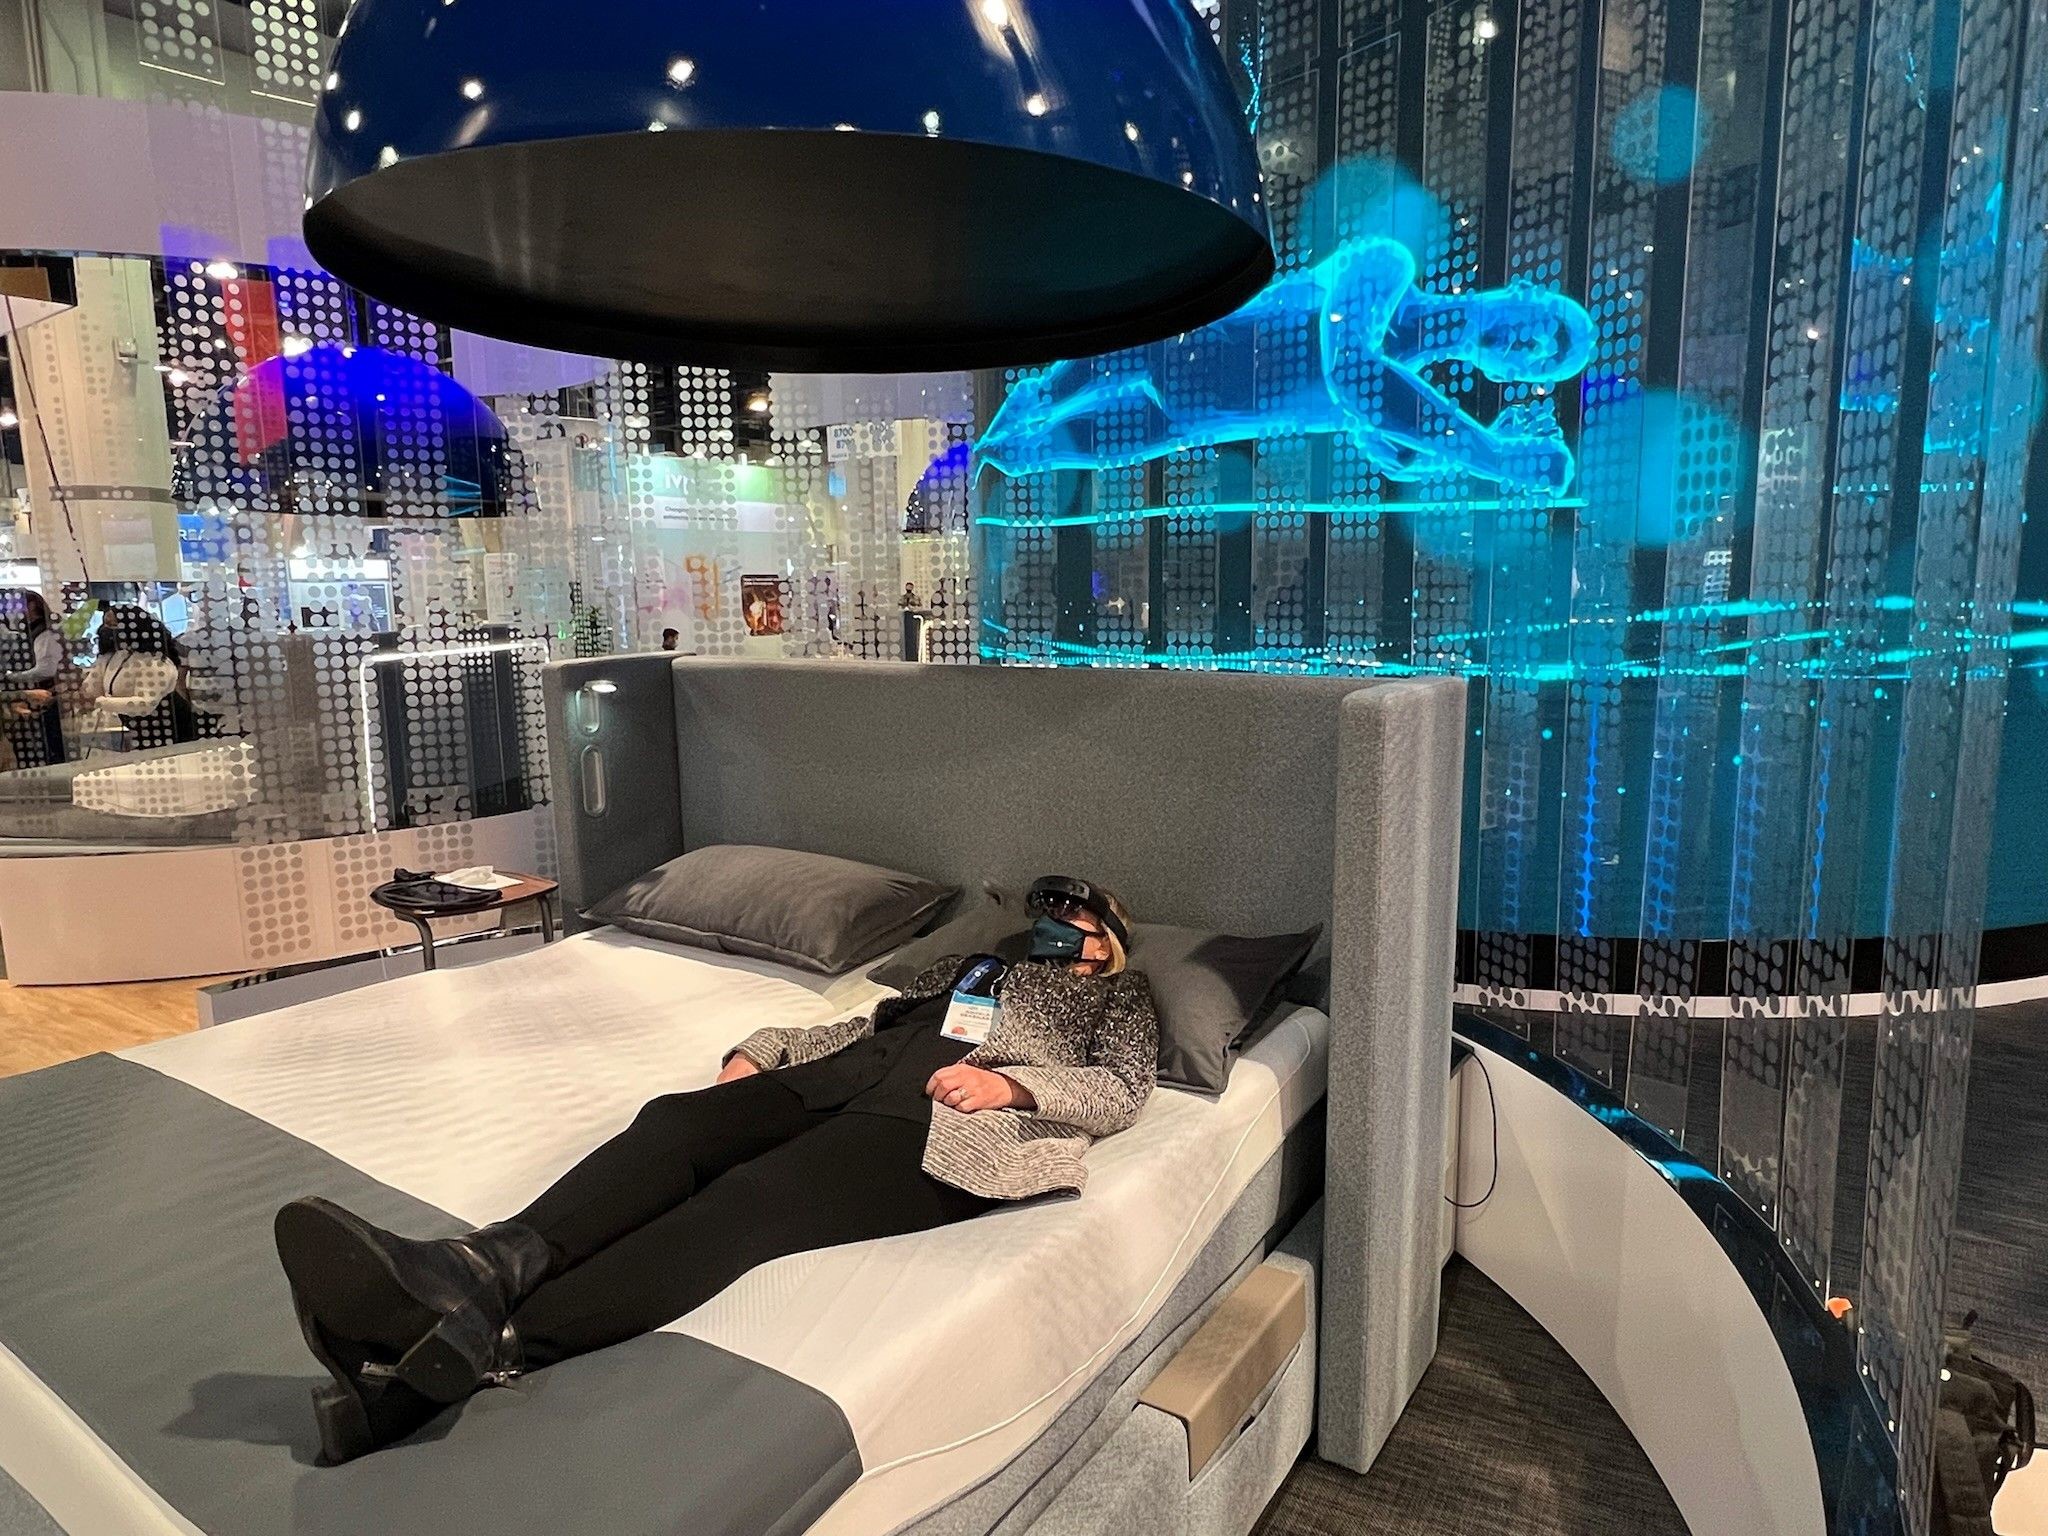 Sleep Number trade show exhibit at CES 2022 with virtual reality interactive product demo